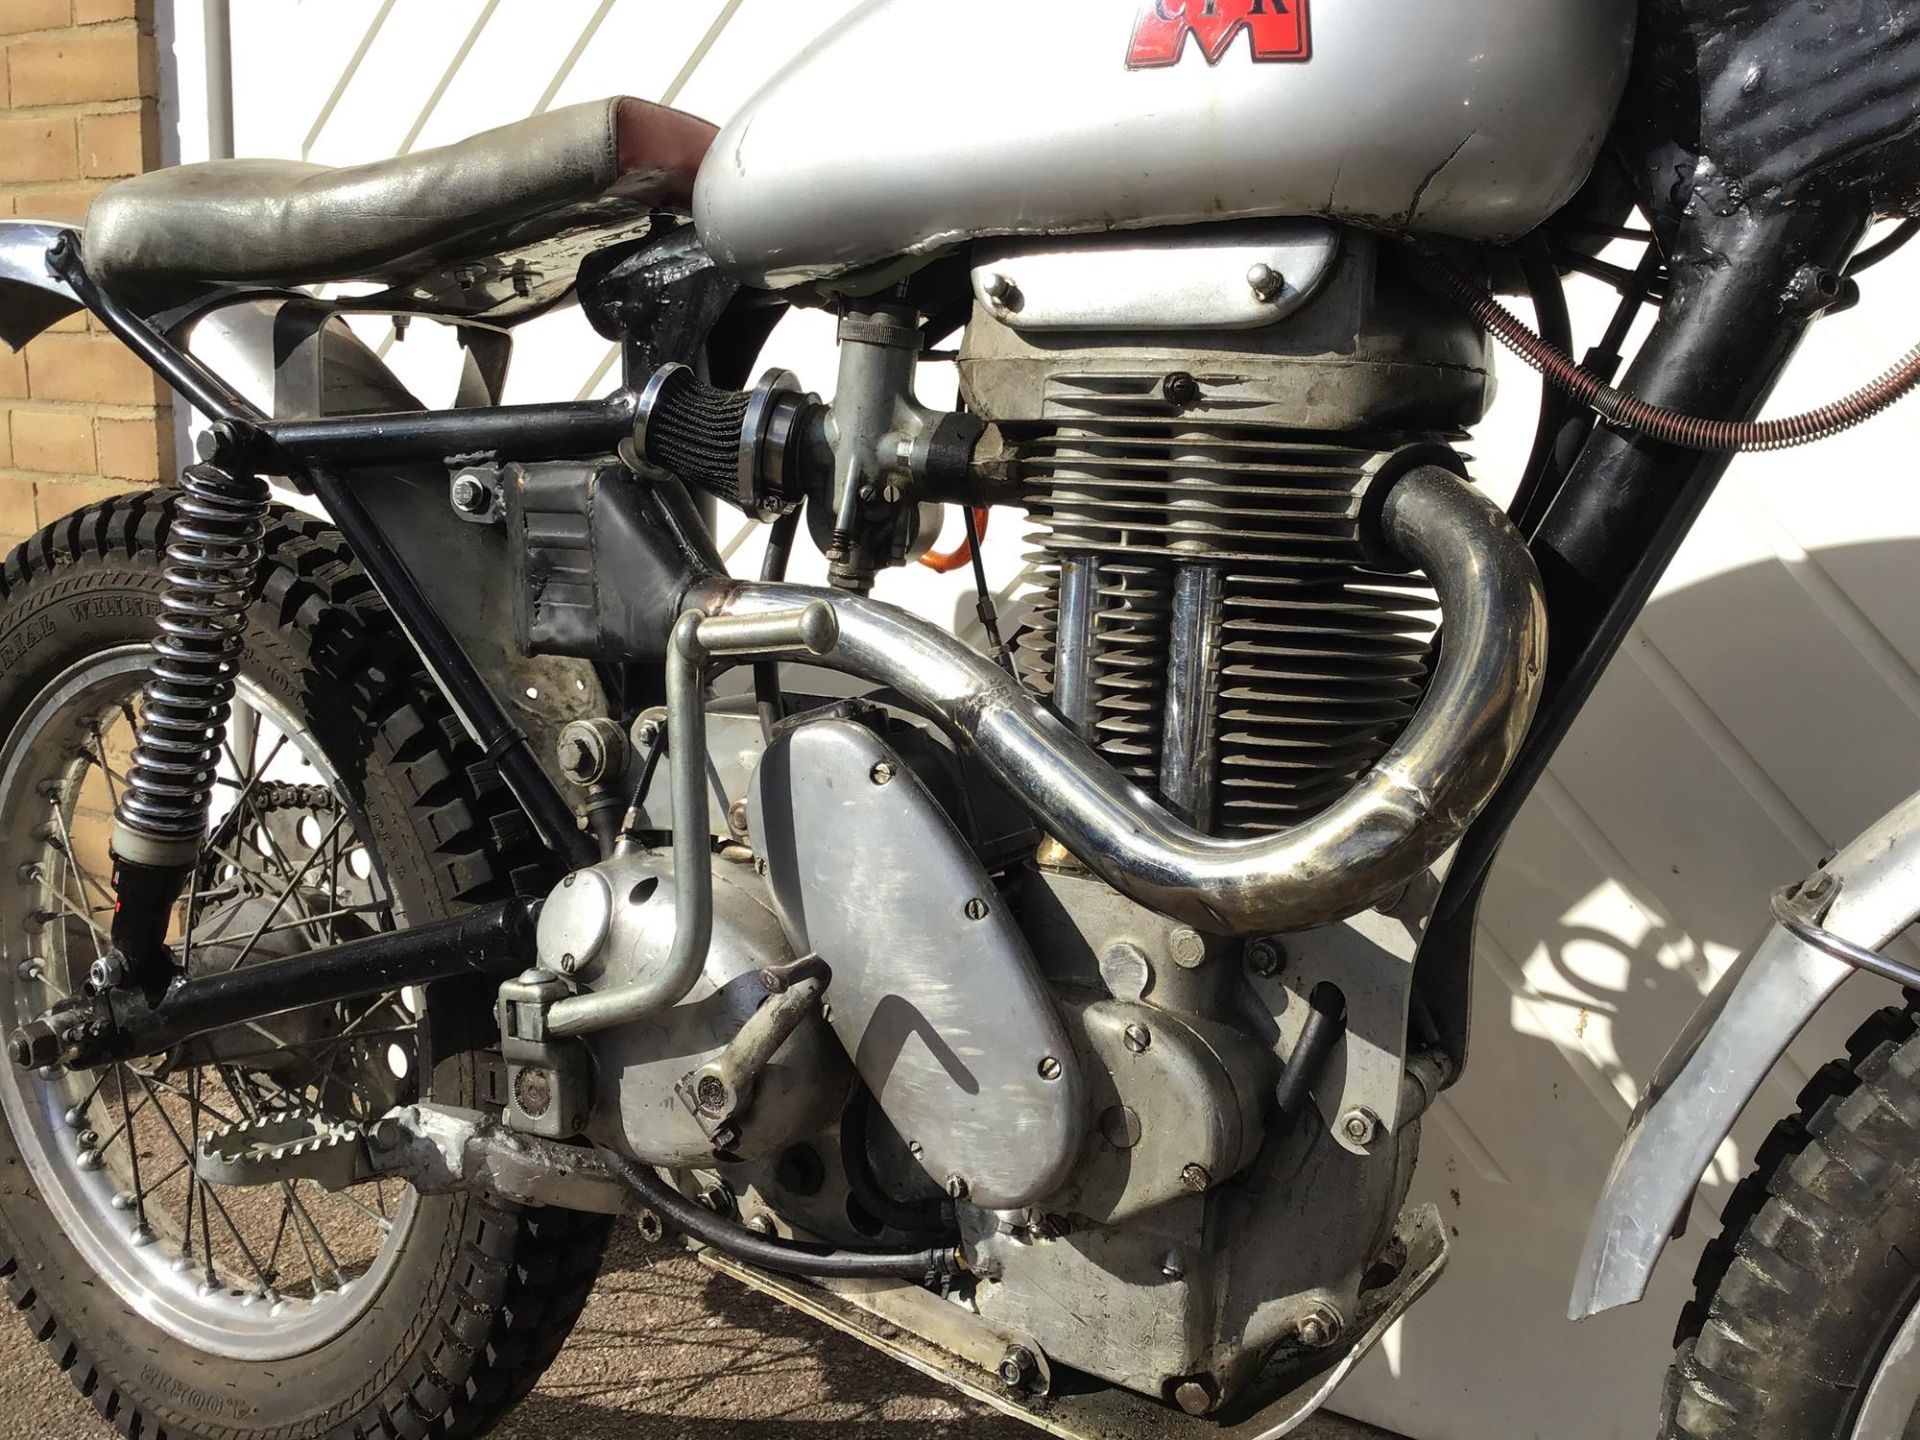 1961 Matchless G3C Trials 349cc - Image 3 of 8